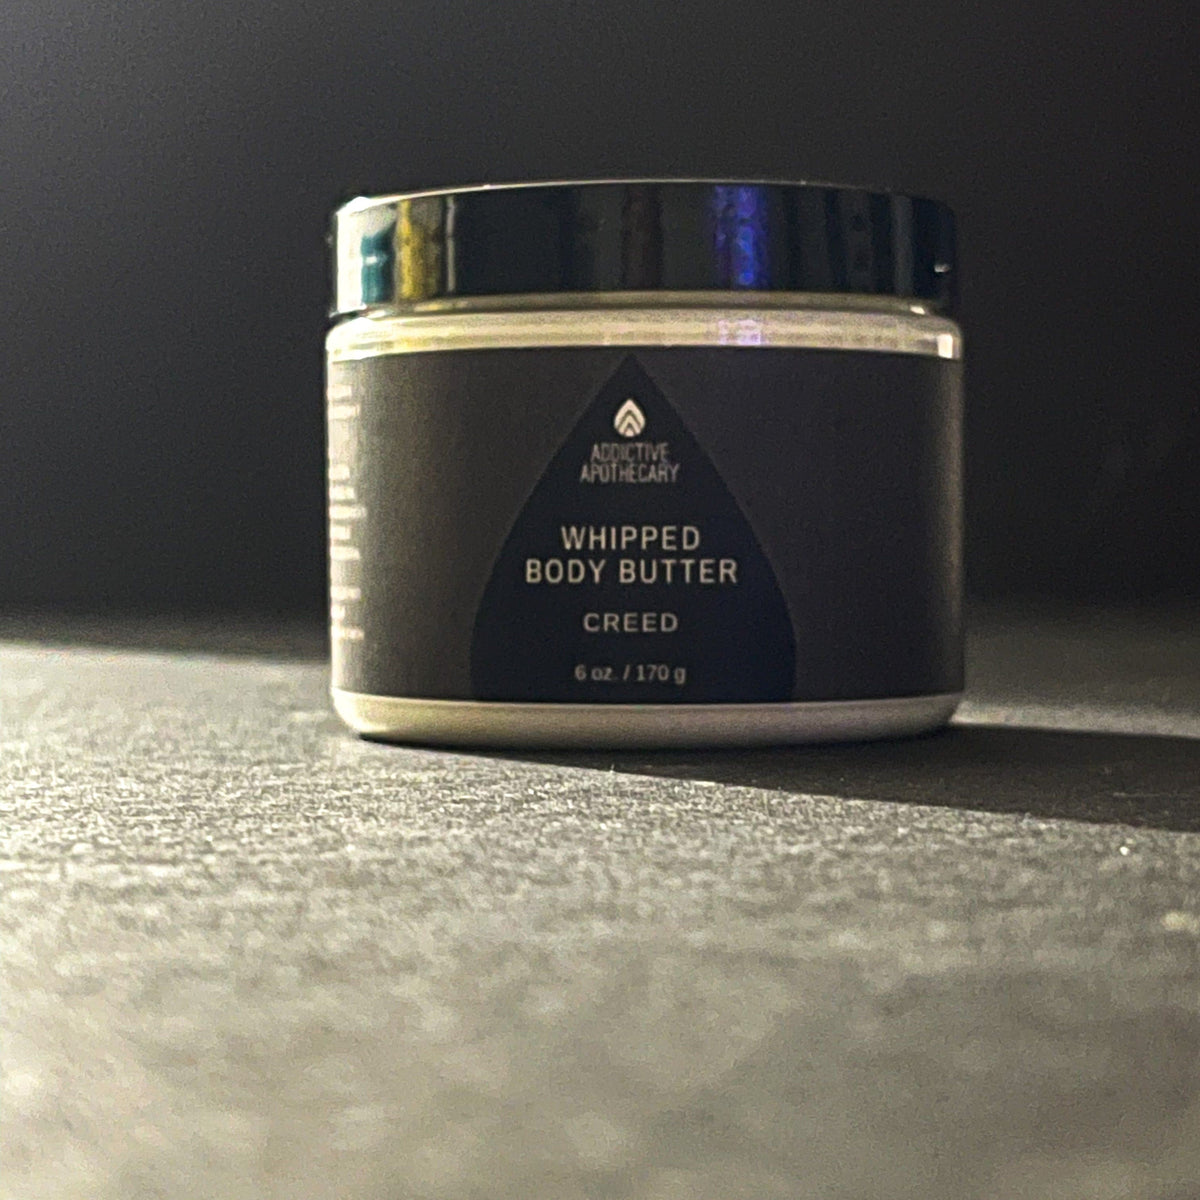 CREED WHIPPED BODY BUTTER